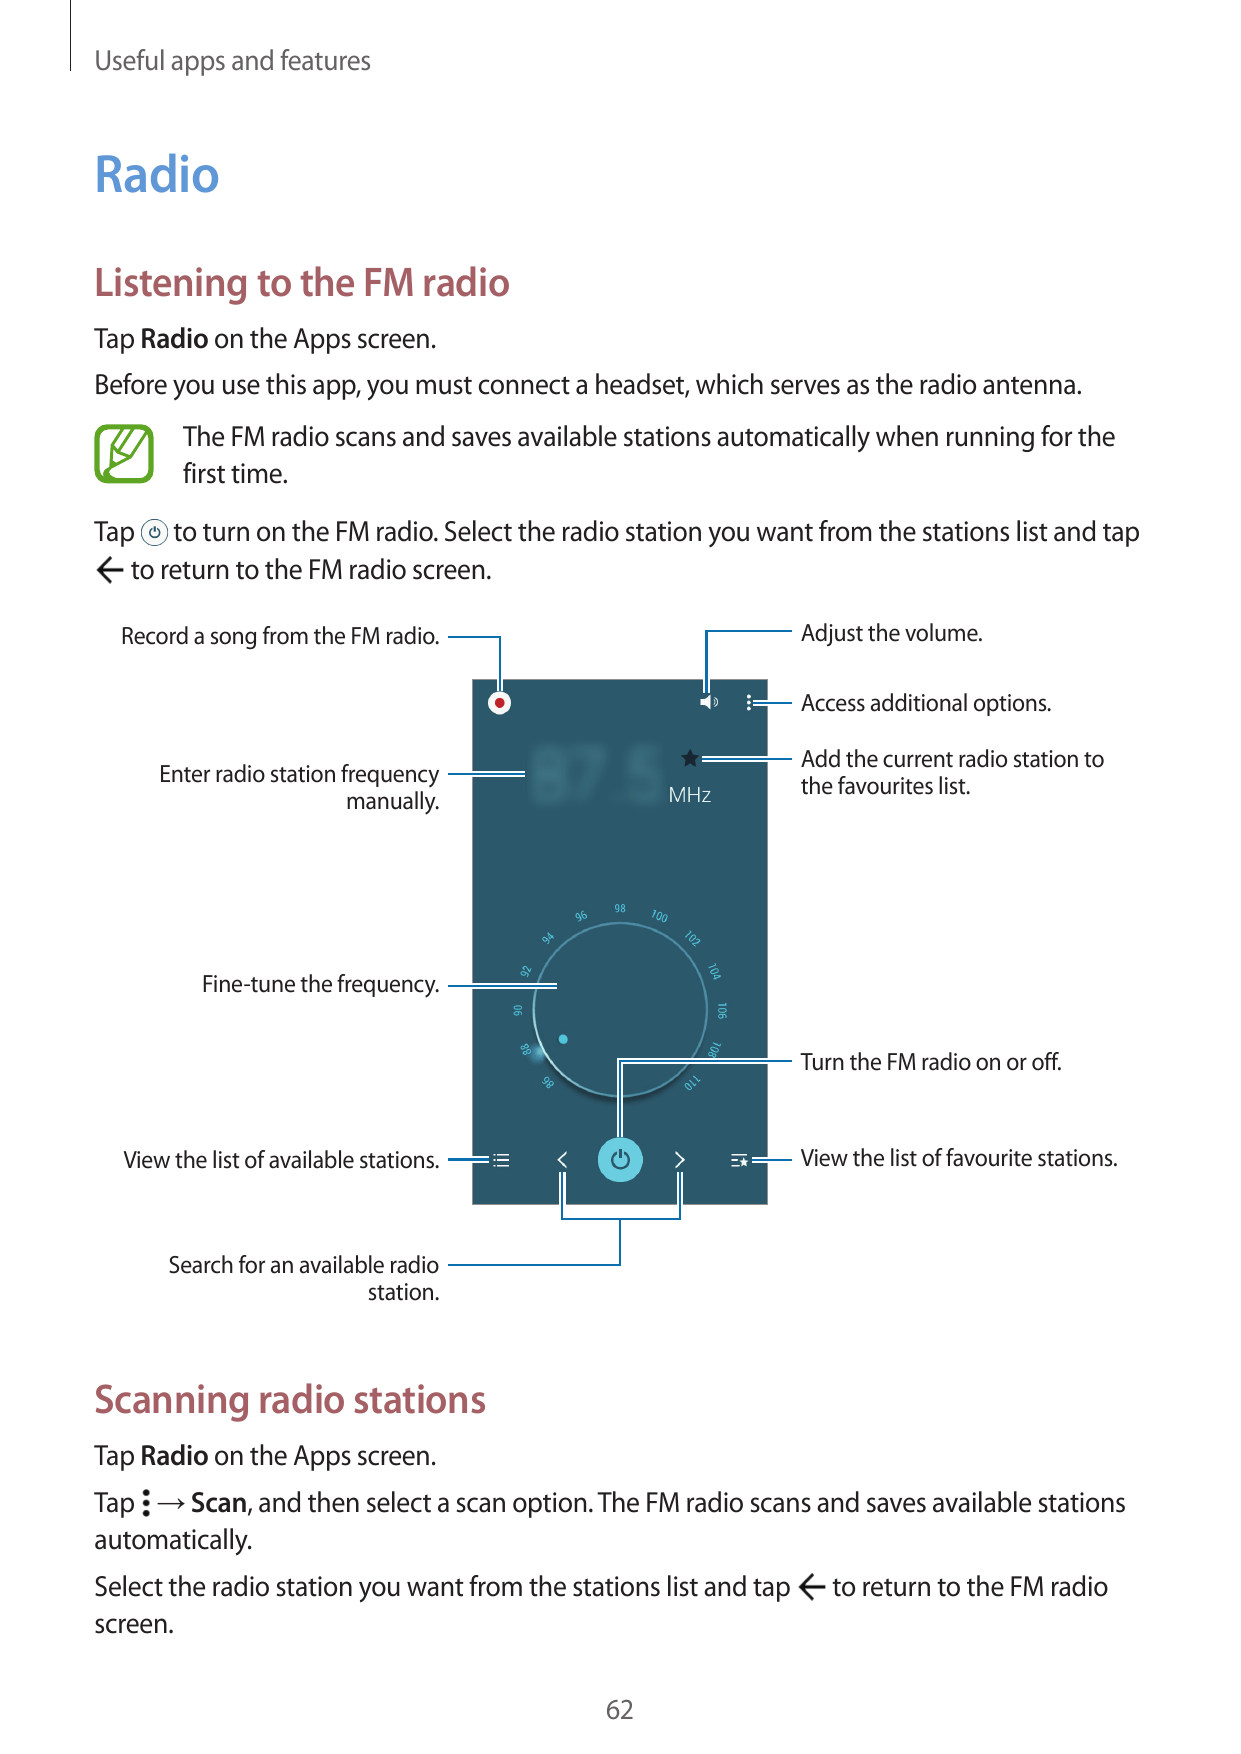 Useful apps and featuresRadioListening to the FM radioTap Radio on the Apps screen.Before you use this app, you must connect a h